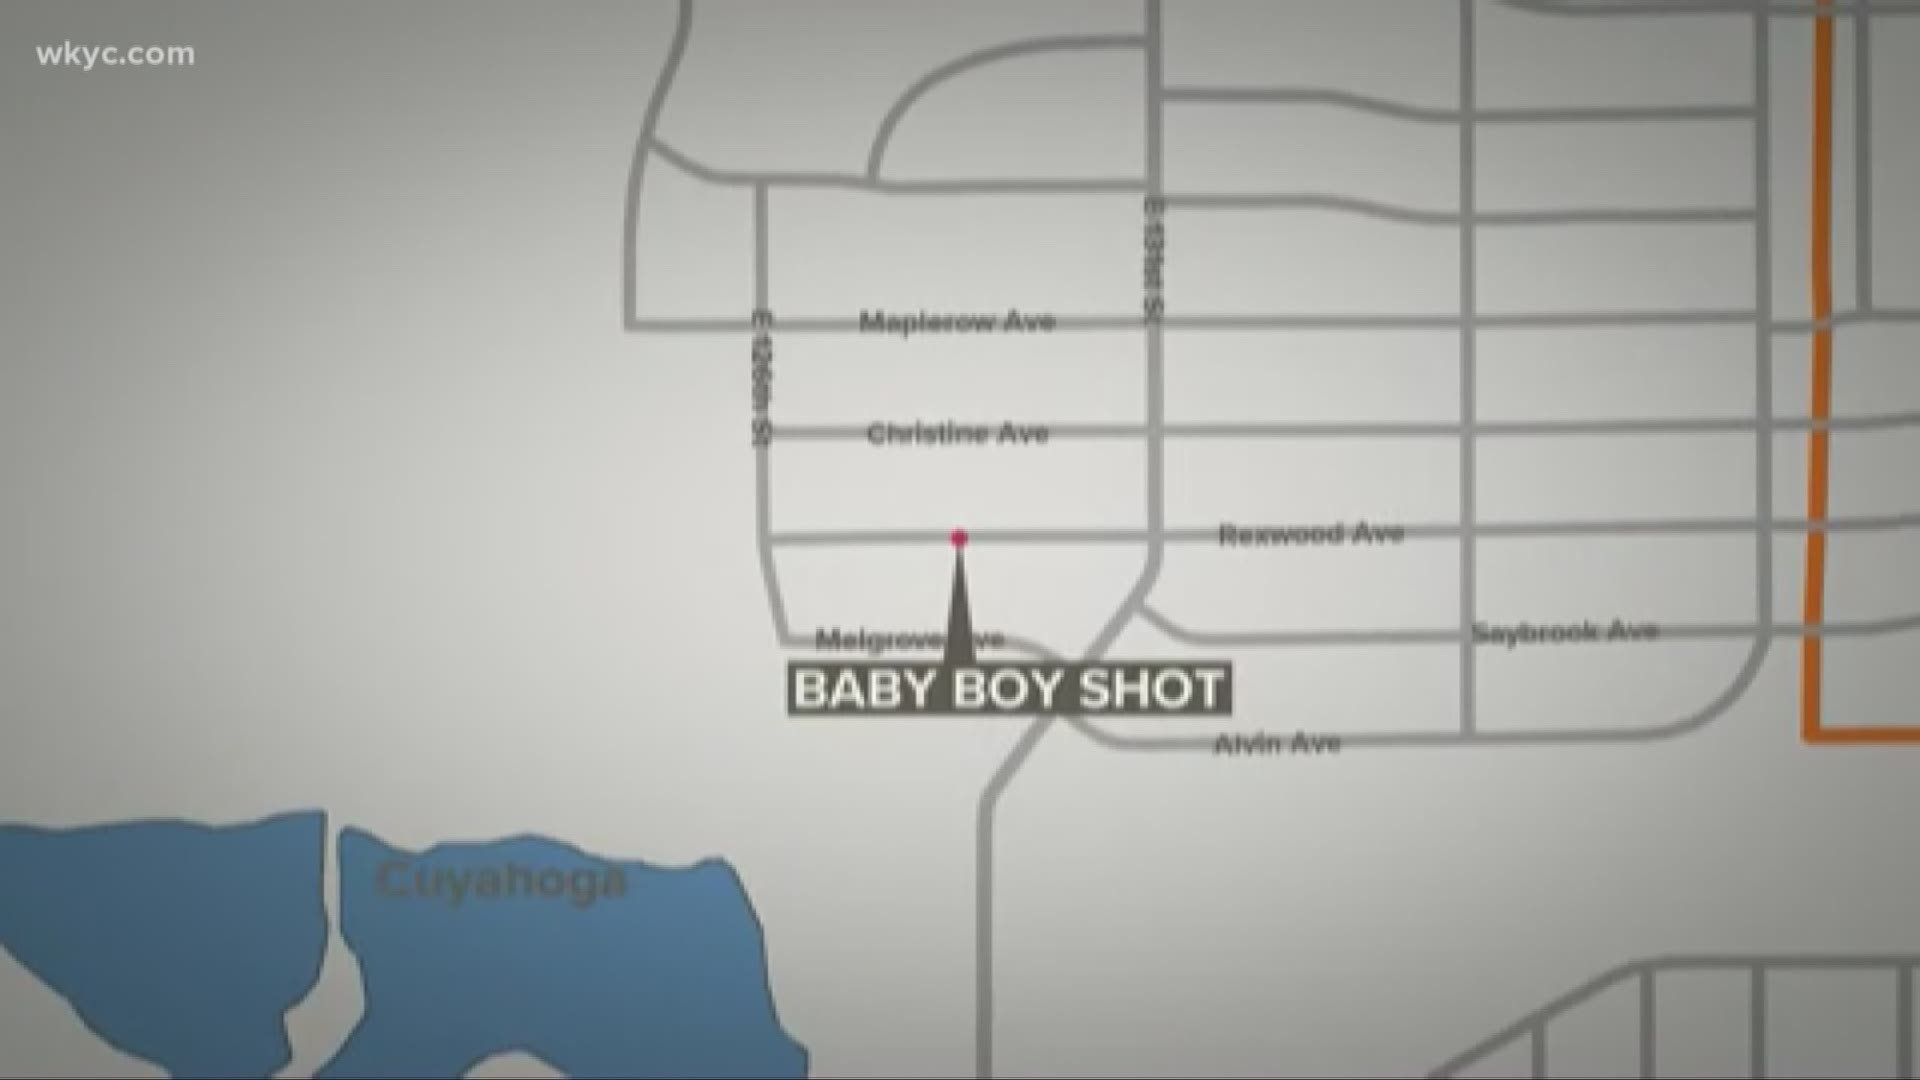 The child was shot around 6:20 p.m. inside a home on the 14200 block of Rexwood Ave.